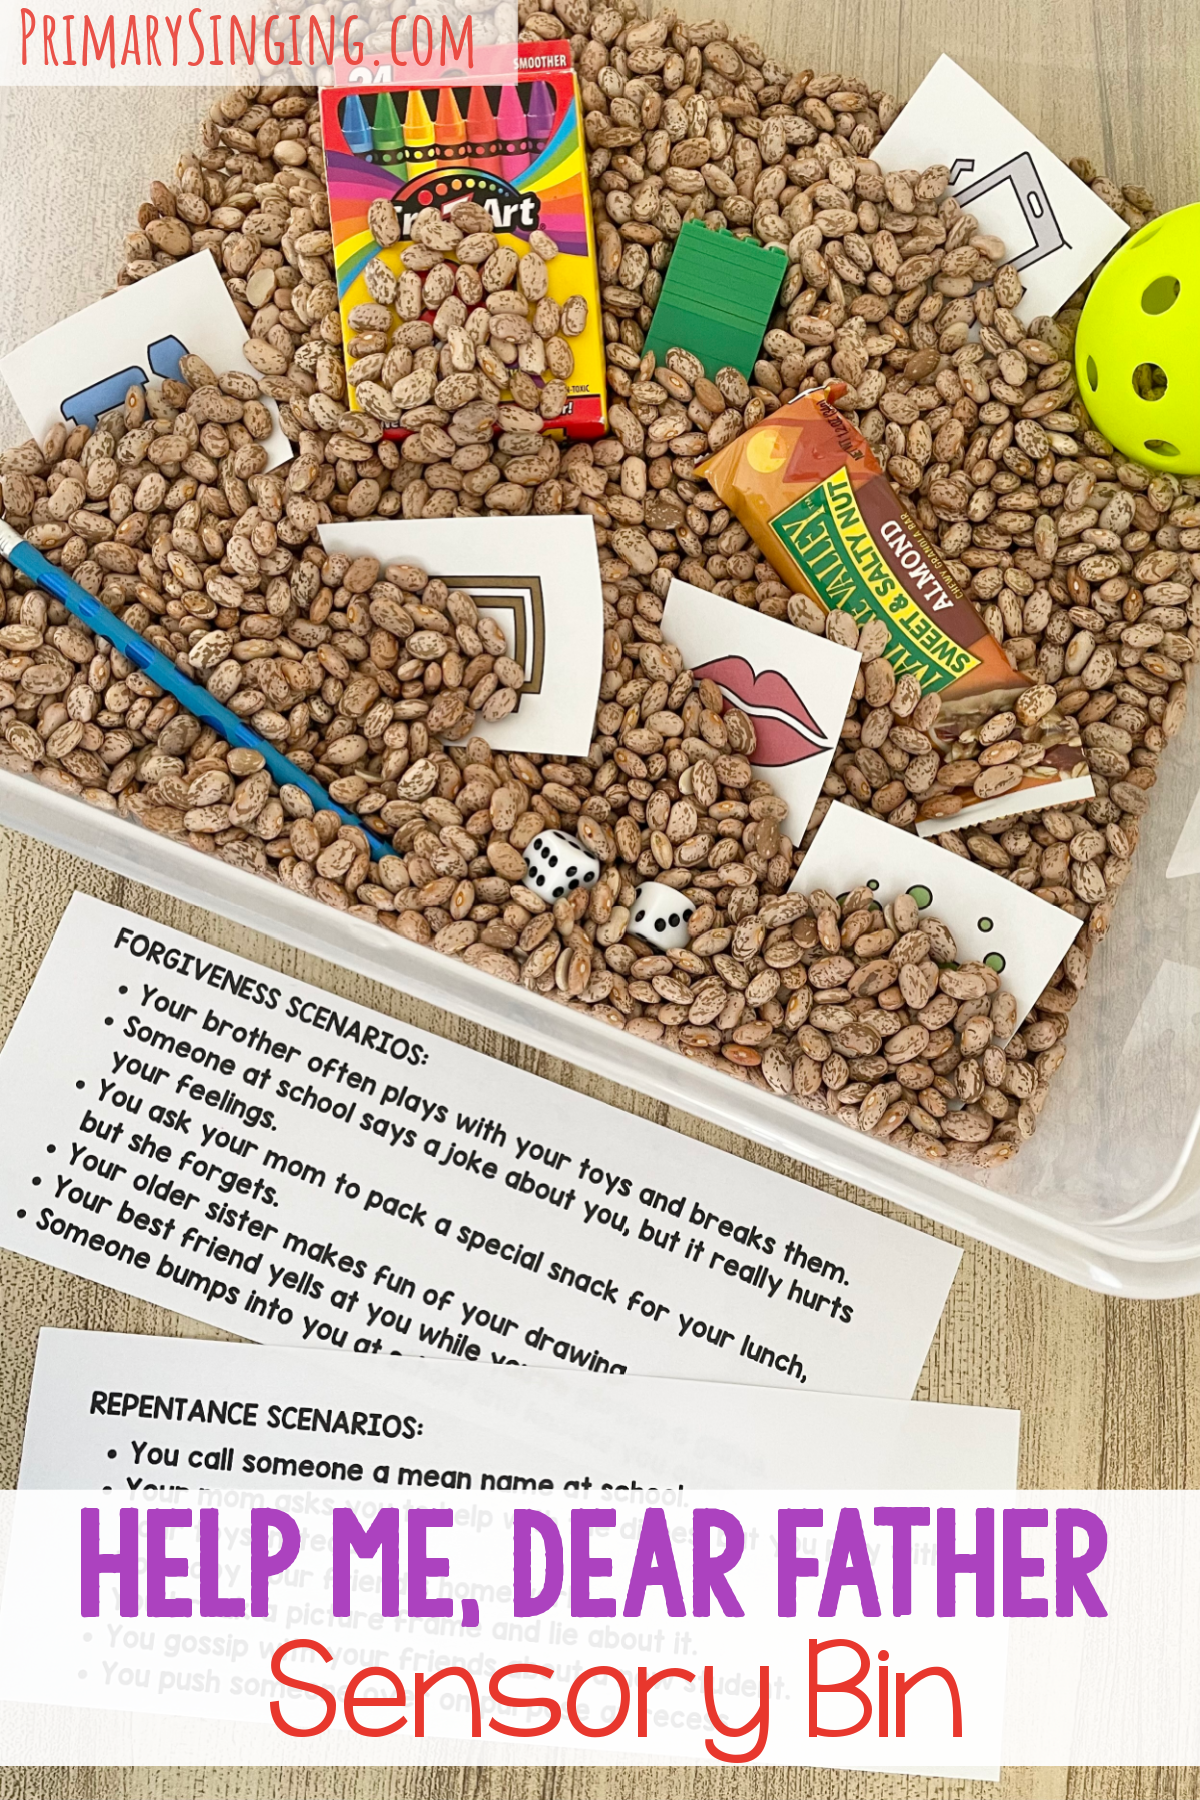 Help Me Dear Father Sensory Bin - Engage your senses with this fun sensory bin object lesson. Just choose an item and read scenarios about forgiveness and repentance with printable song helps for LDS Primary Music Leaders.